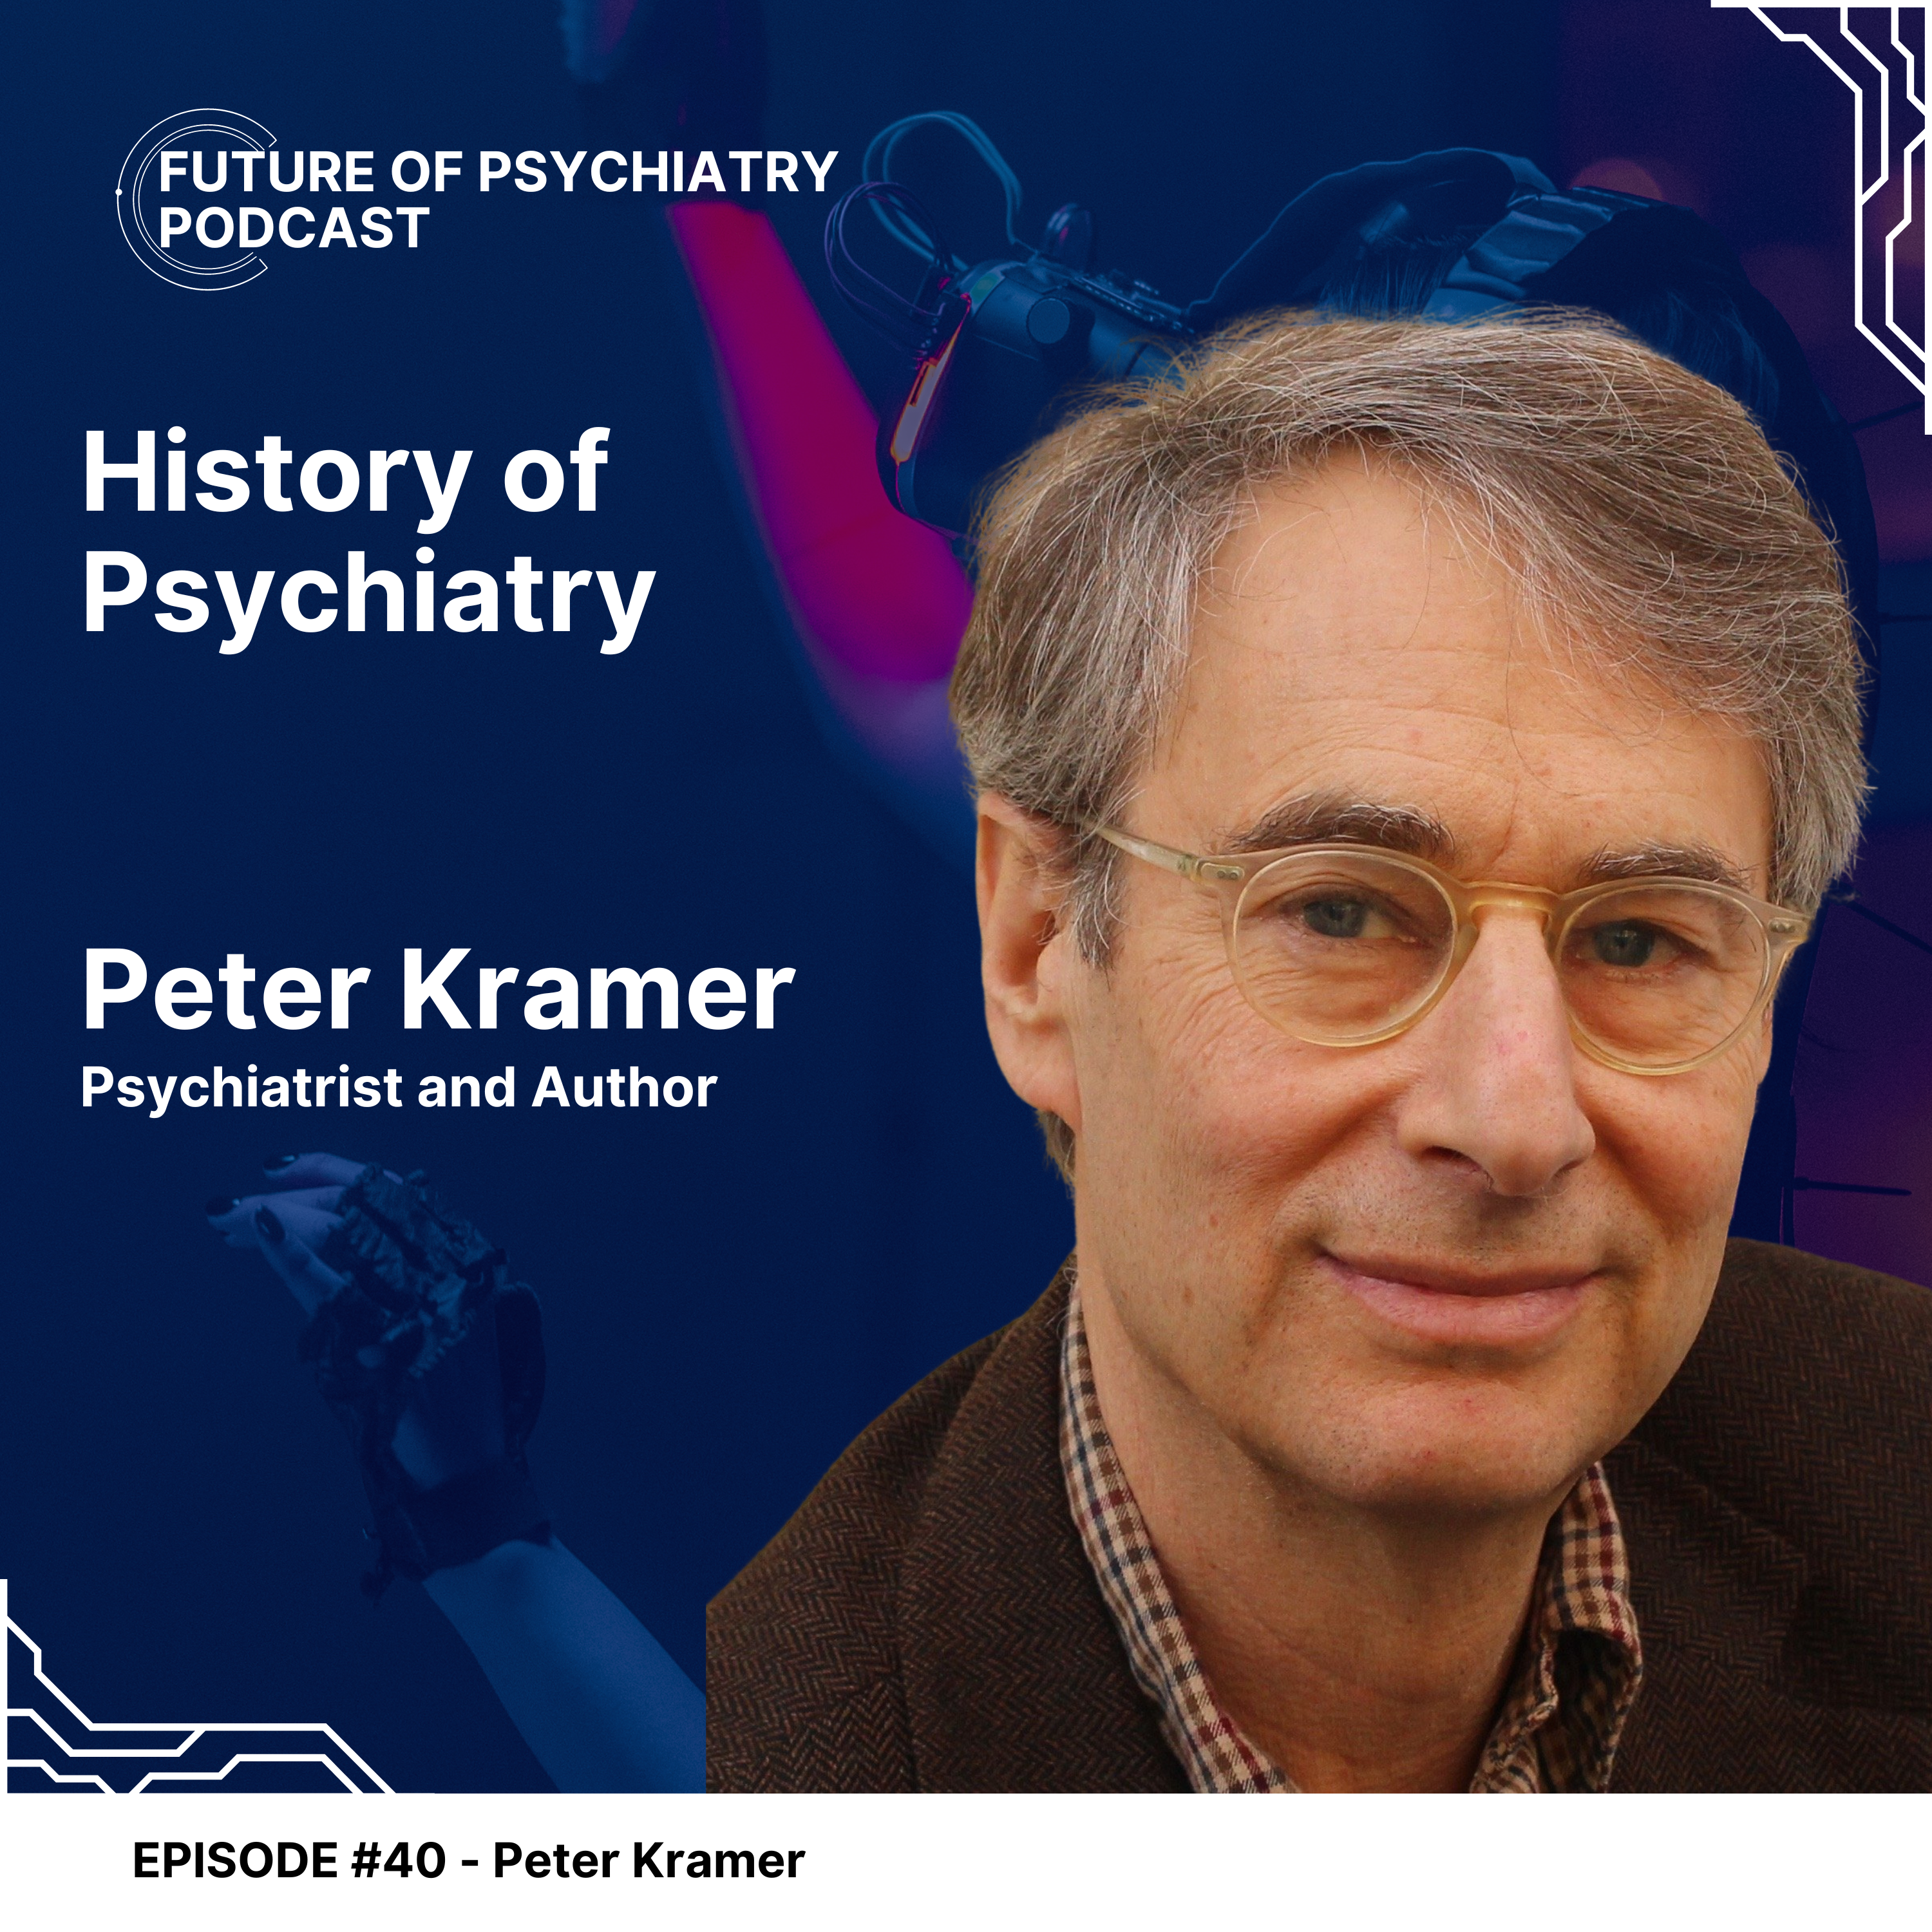 History of Psychiatry with Peter Kramer